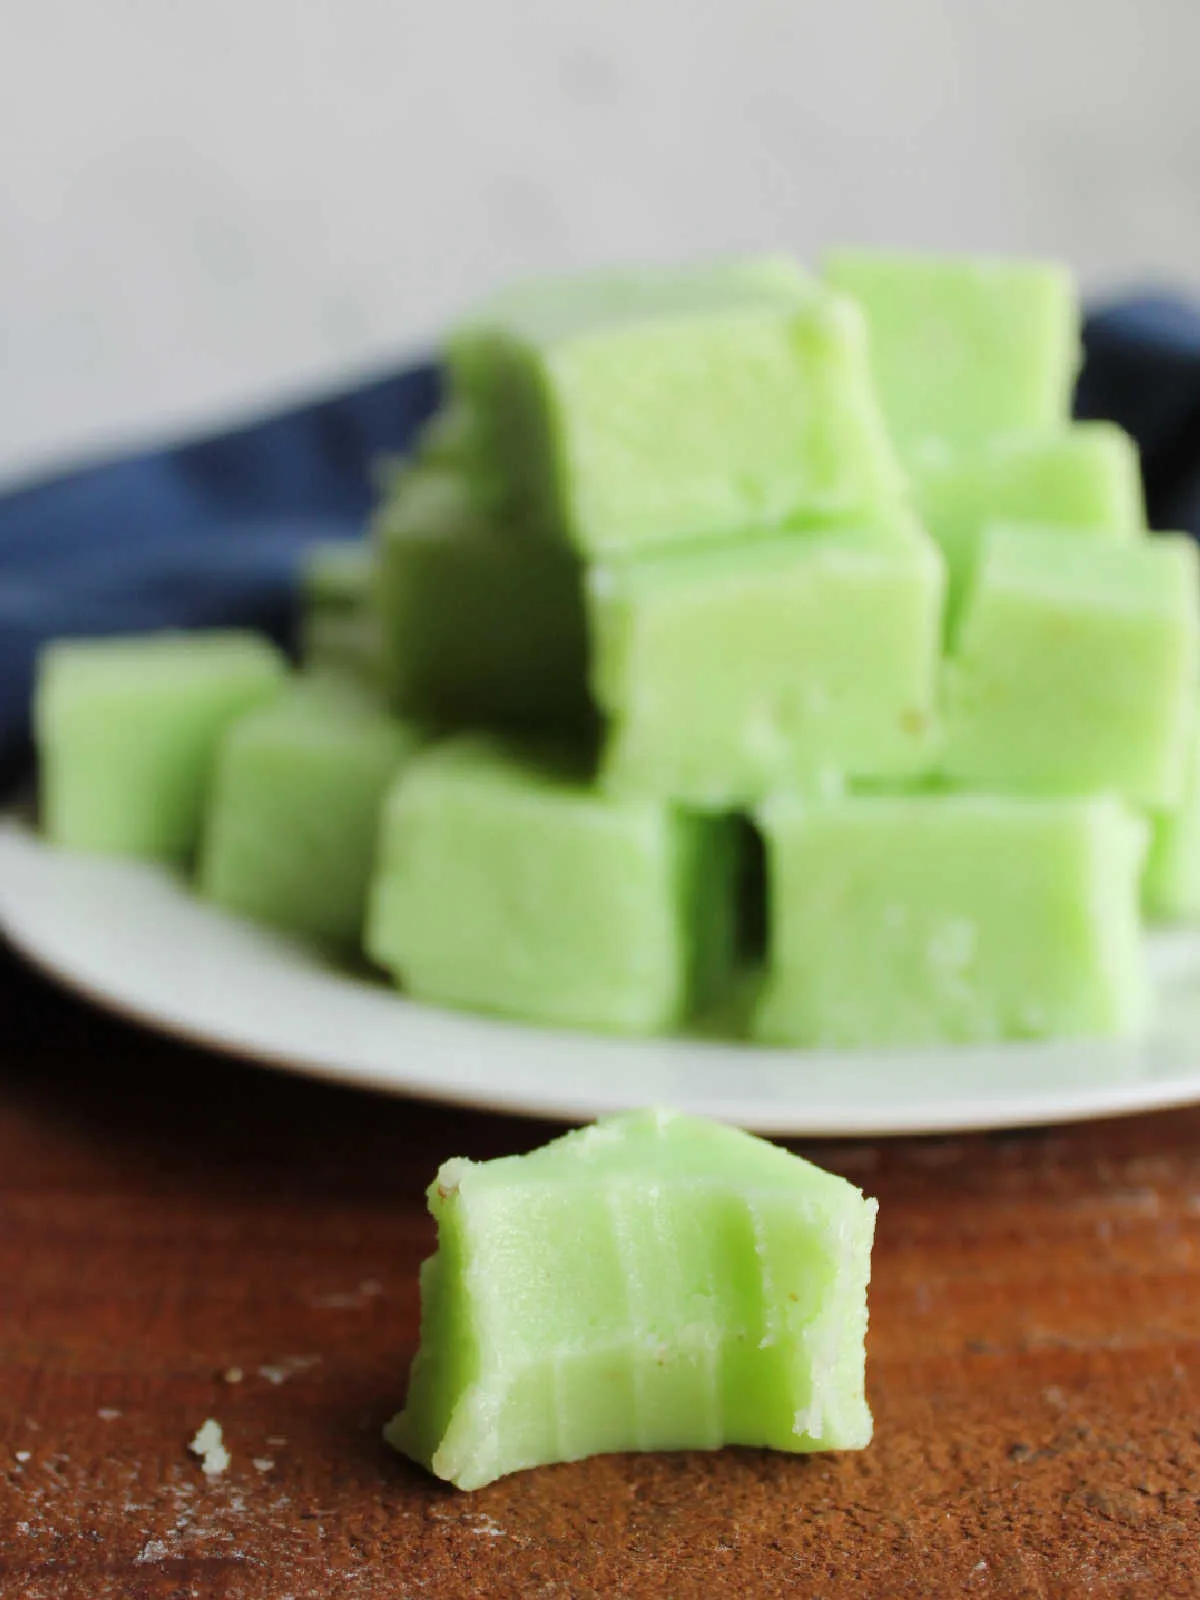 Piece of lime jello fudge with a bite missing, showing creamy texture, with more pieces of fudge in the background.